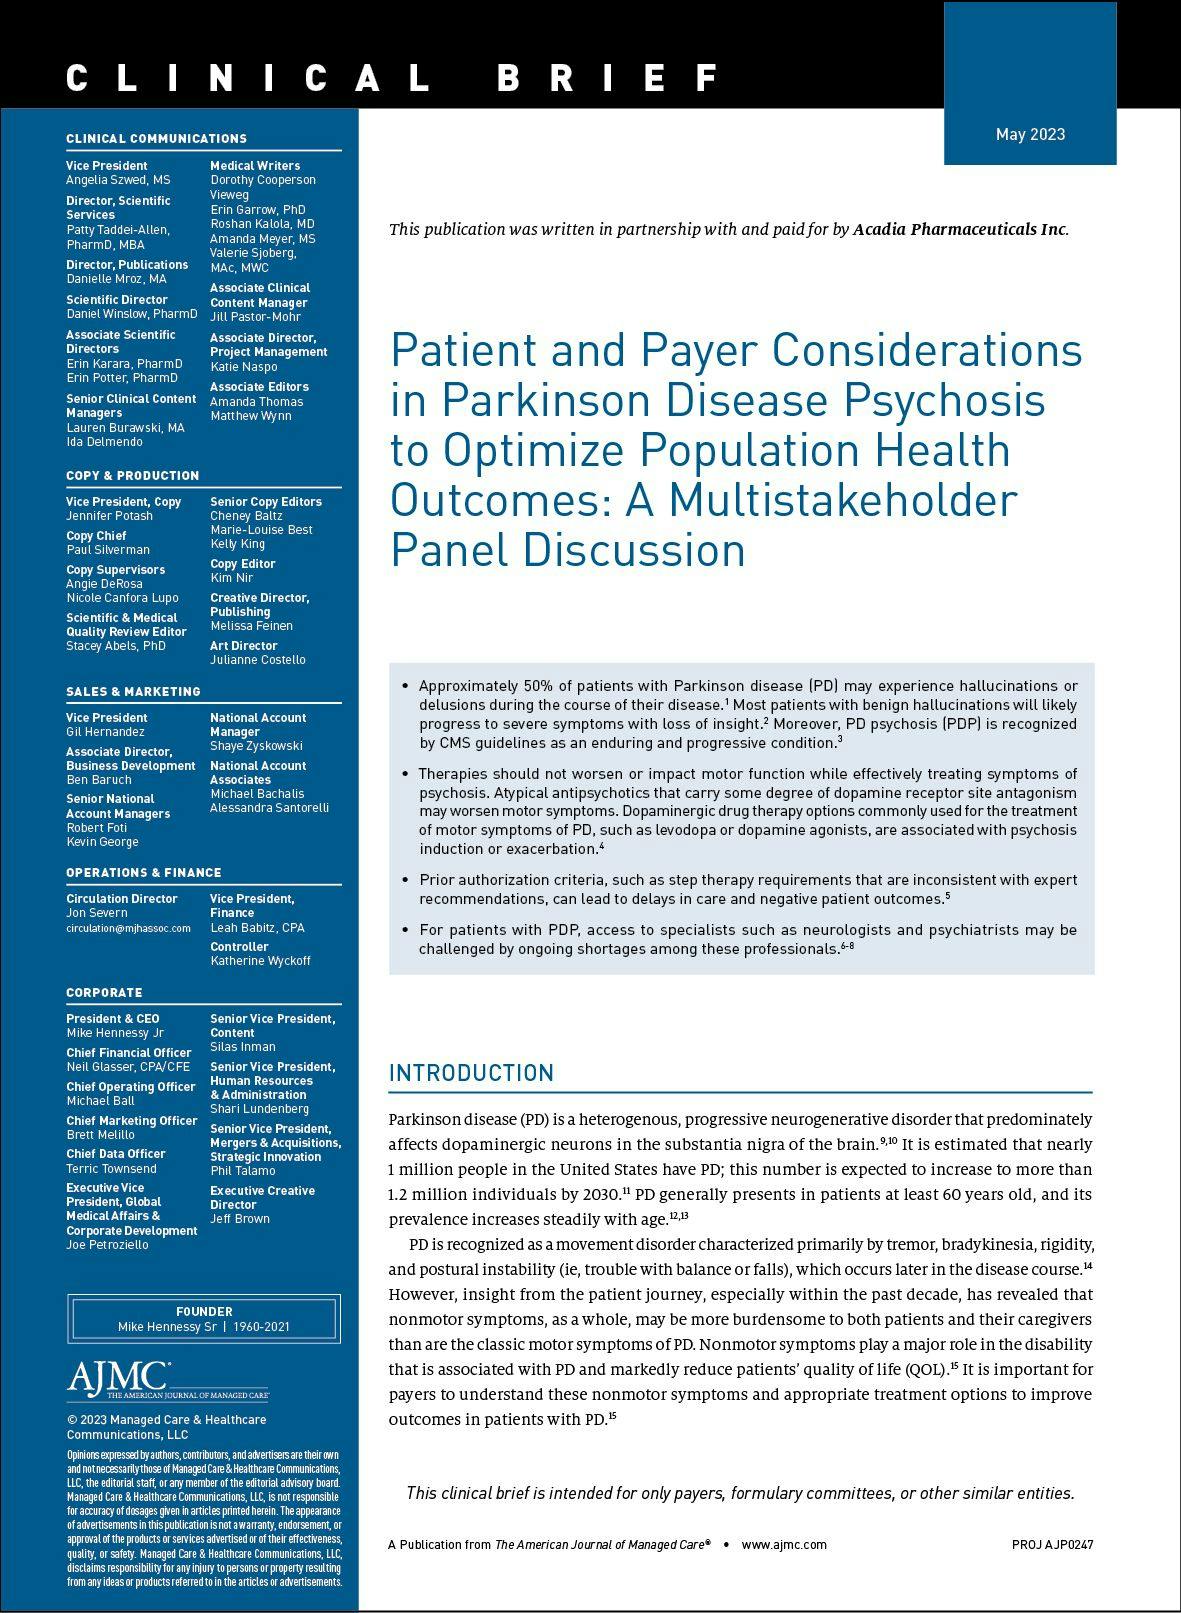 Patient and Payer Considerations in Parkinson Disease Psychosis to Optimize Population Health Outcomes: A Multistakeholder Panel Discussion